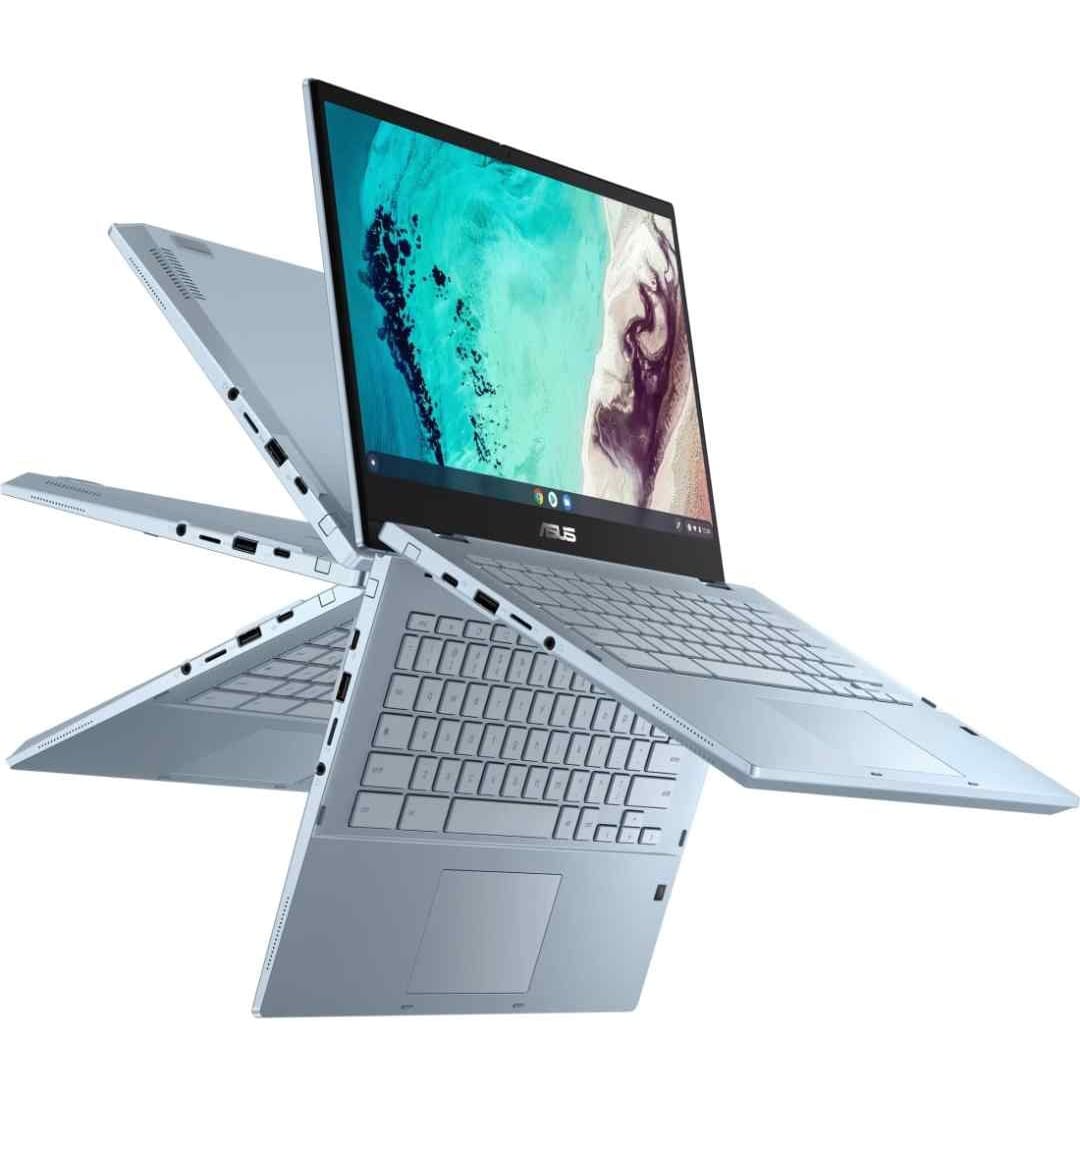 ASUS launched the lightest laptop, which will come with a touch screen ASUS Vivobook 14 Touch Launched in India Feature and Price